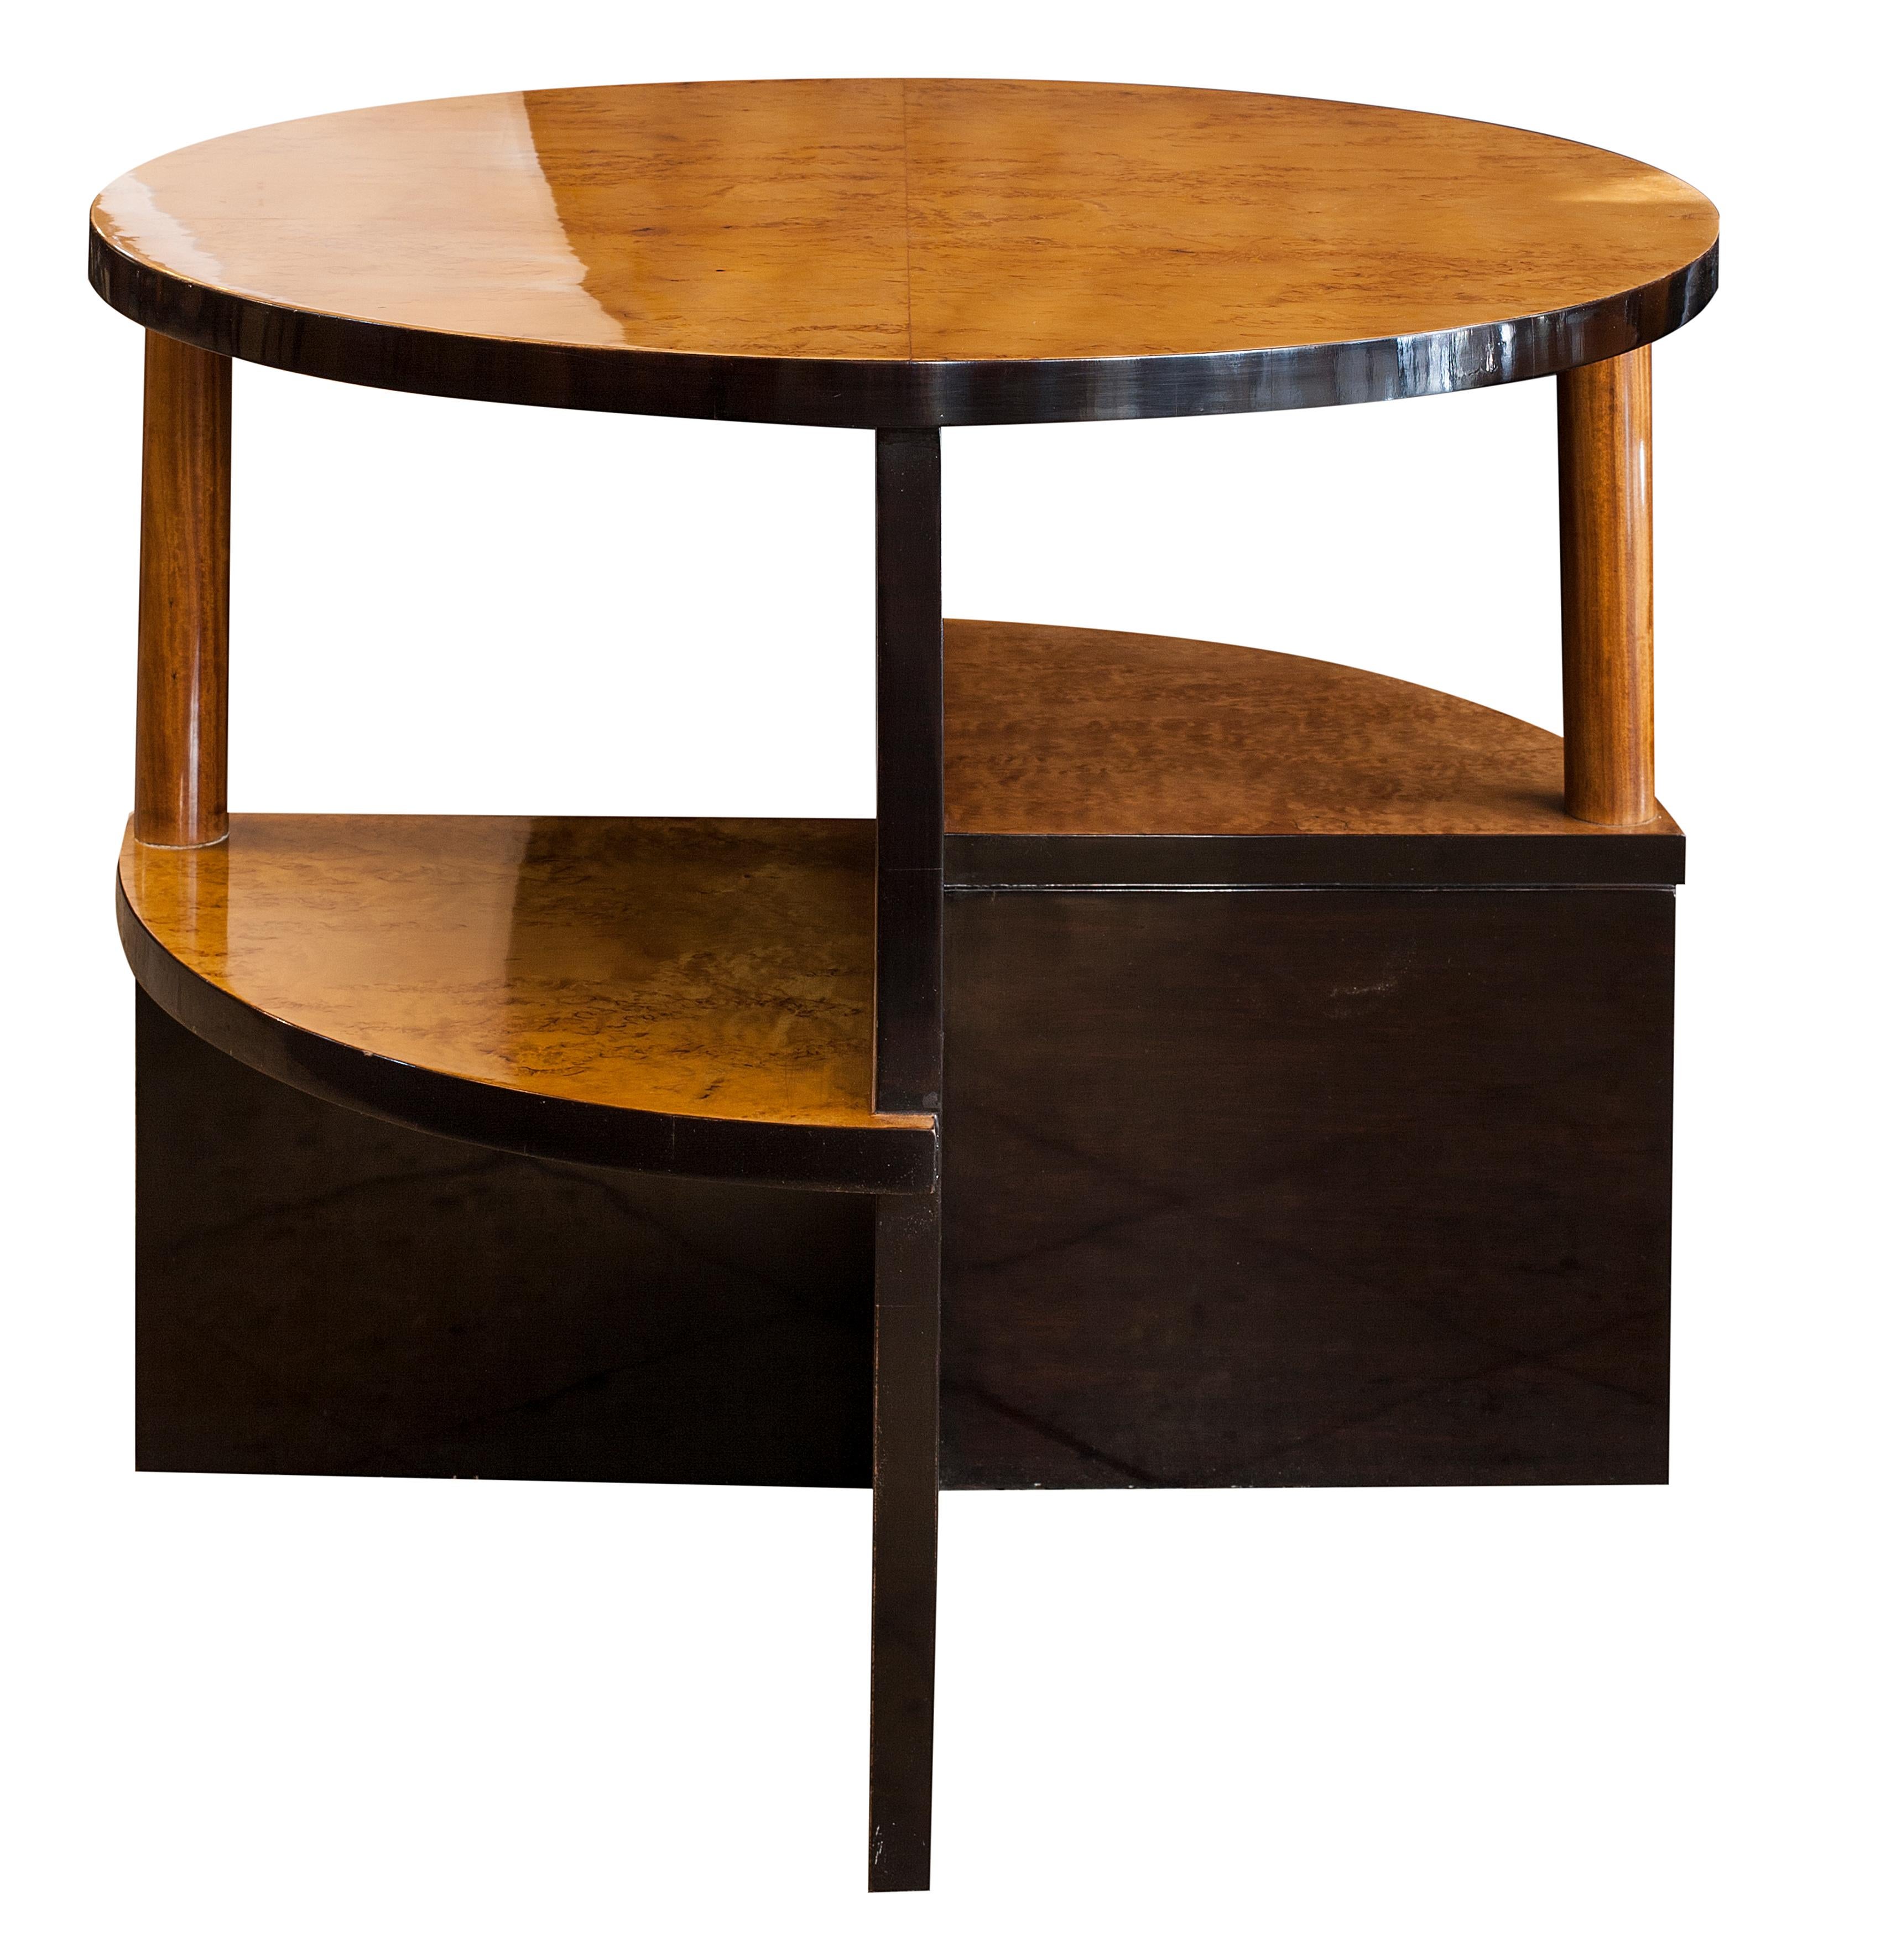 Exhibited at Original antique show ( Miami beach ).
Two tables 
Material: wood 
Style: Art Deco
Country: France
If you want to live in the golden years, this is the tables that your project needs.
We have specialized in the sale of Art Deco and Art